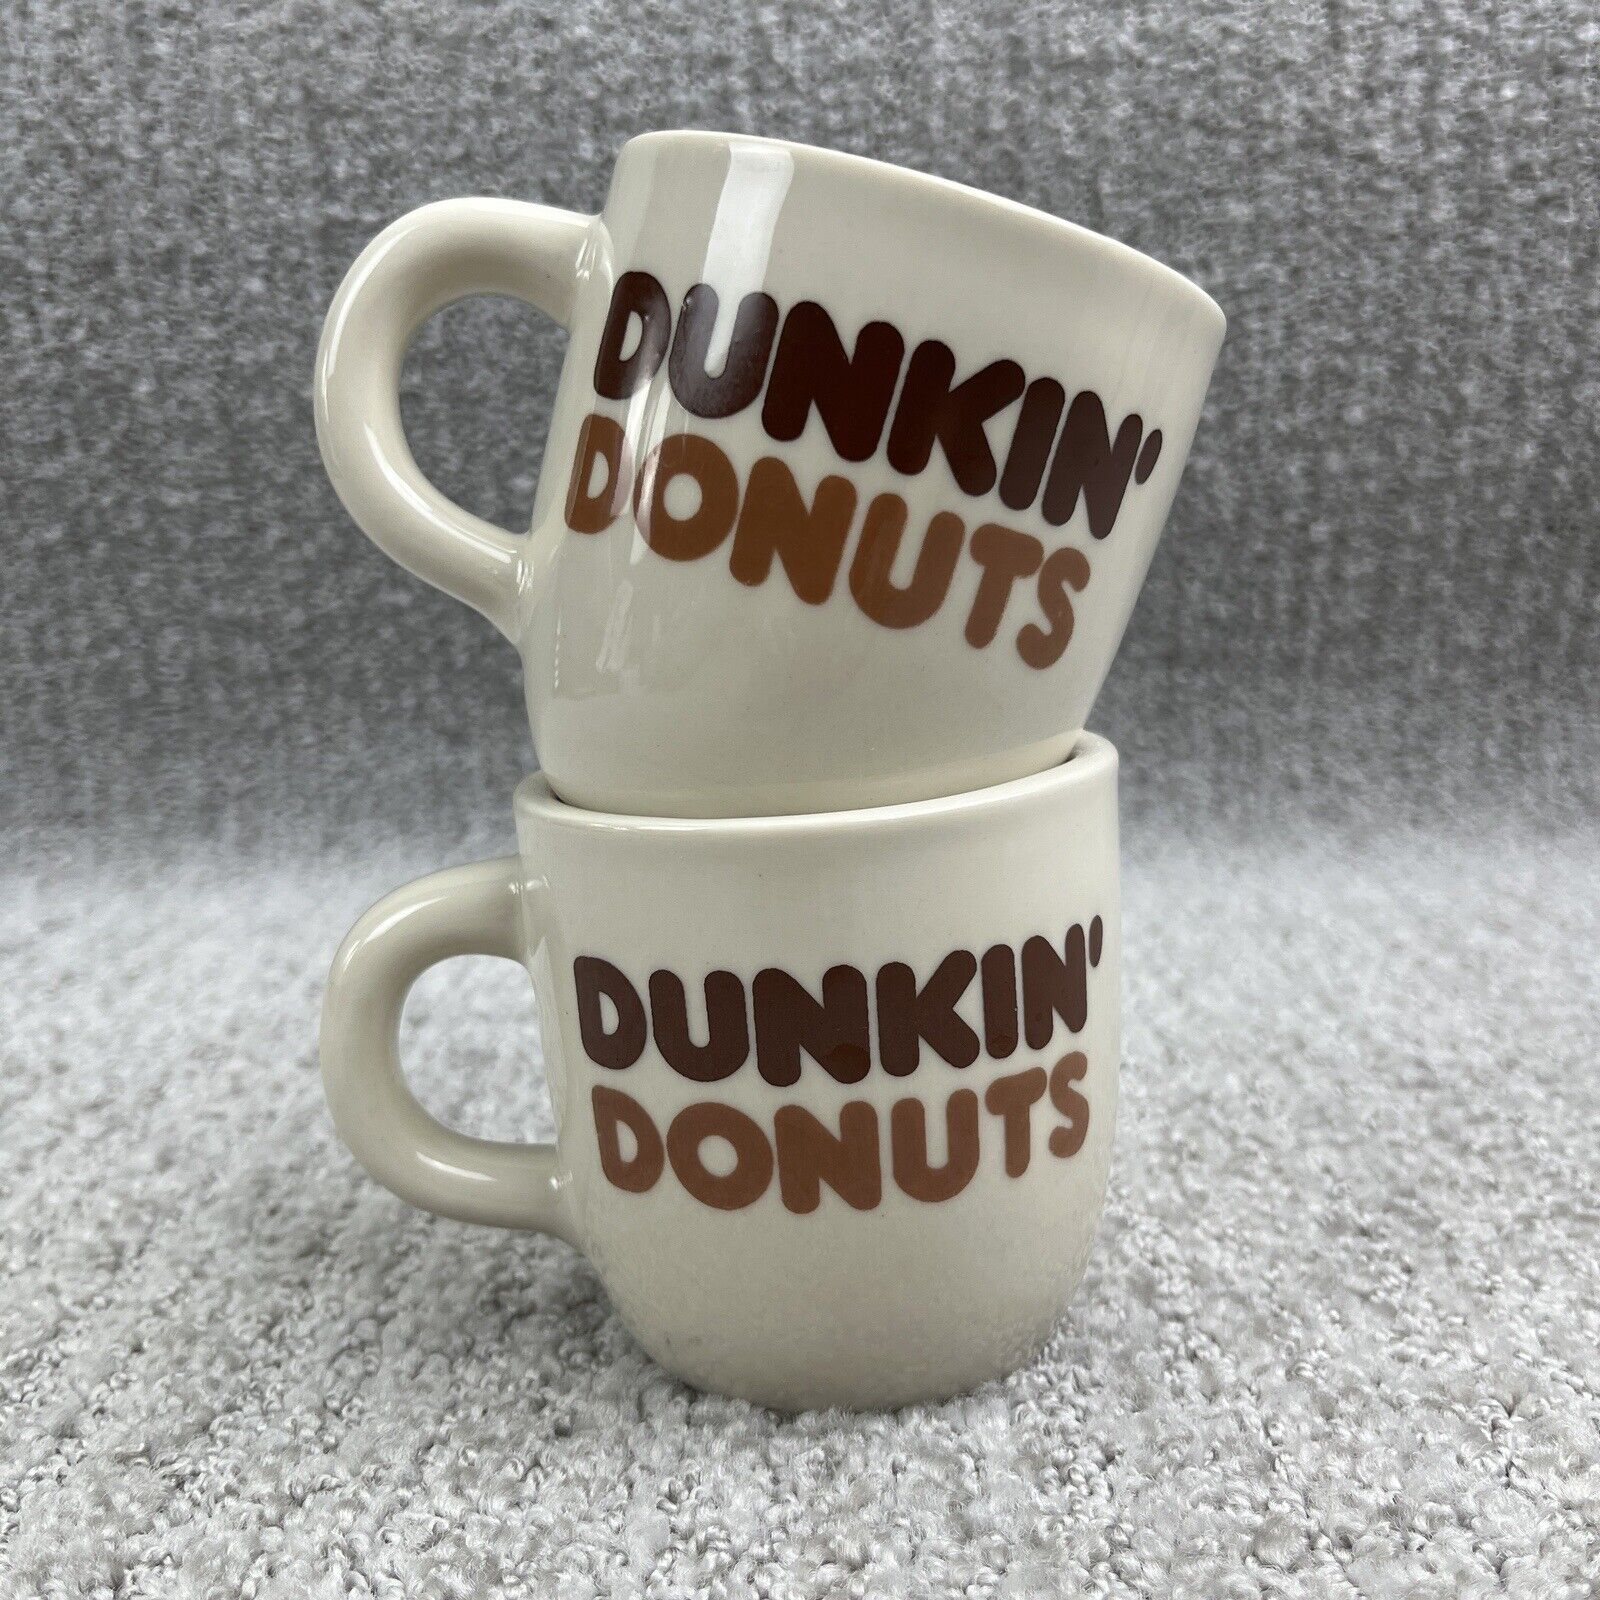 Vintage Dunkin Donuts Coffee Cups Mugs Diner 6oz Rego E997-41 Lot of 2